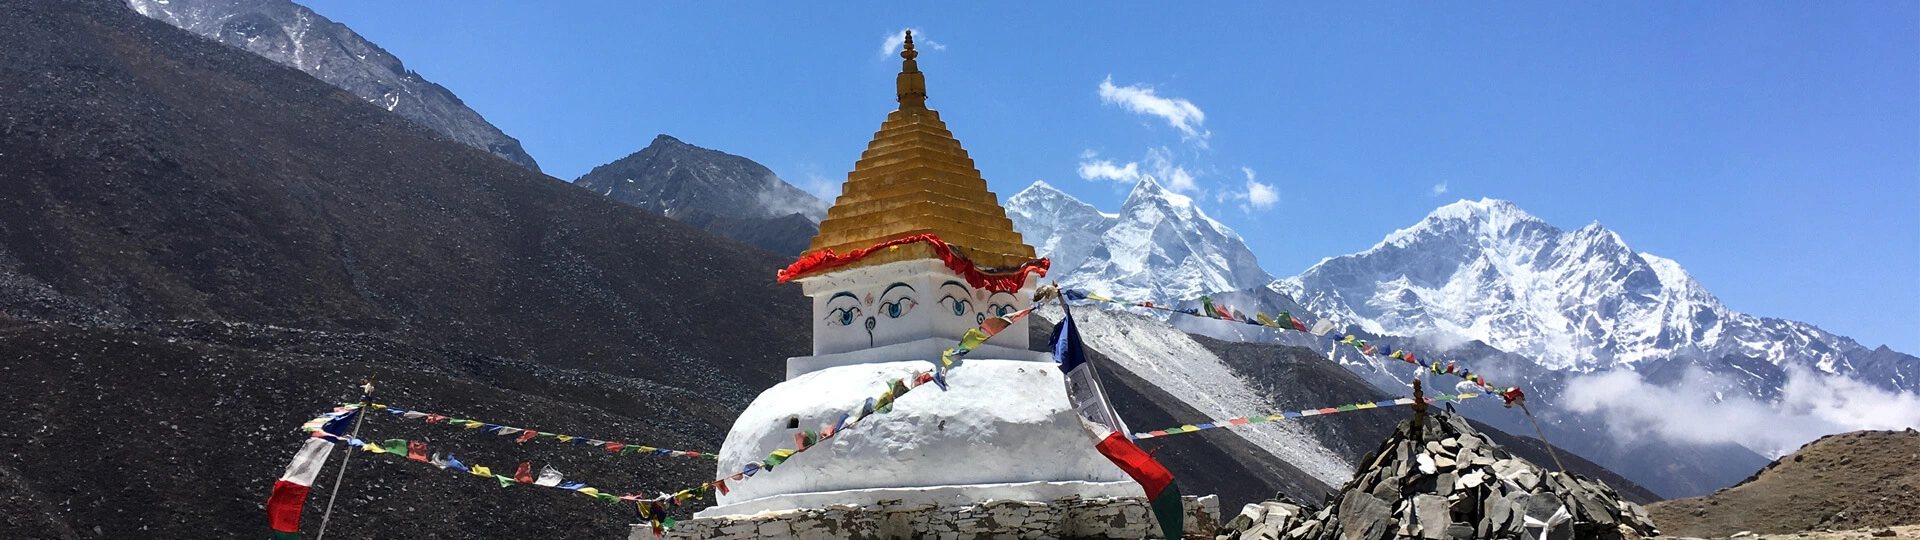 Top Reason to Do the Everest Base Camp Trek